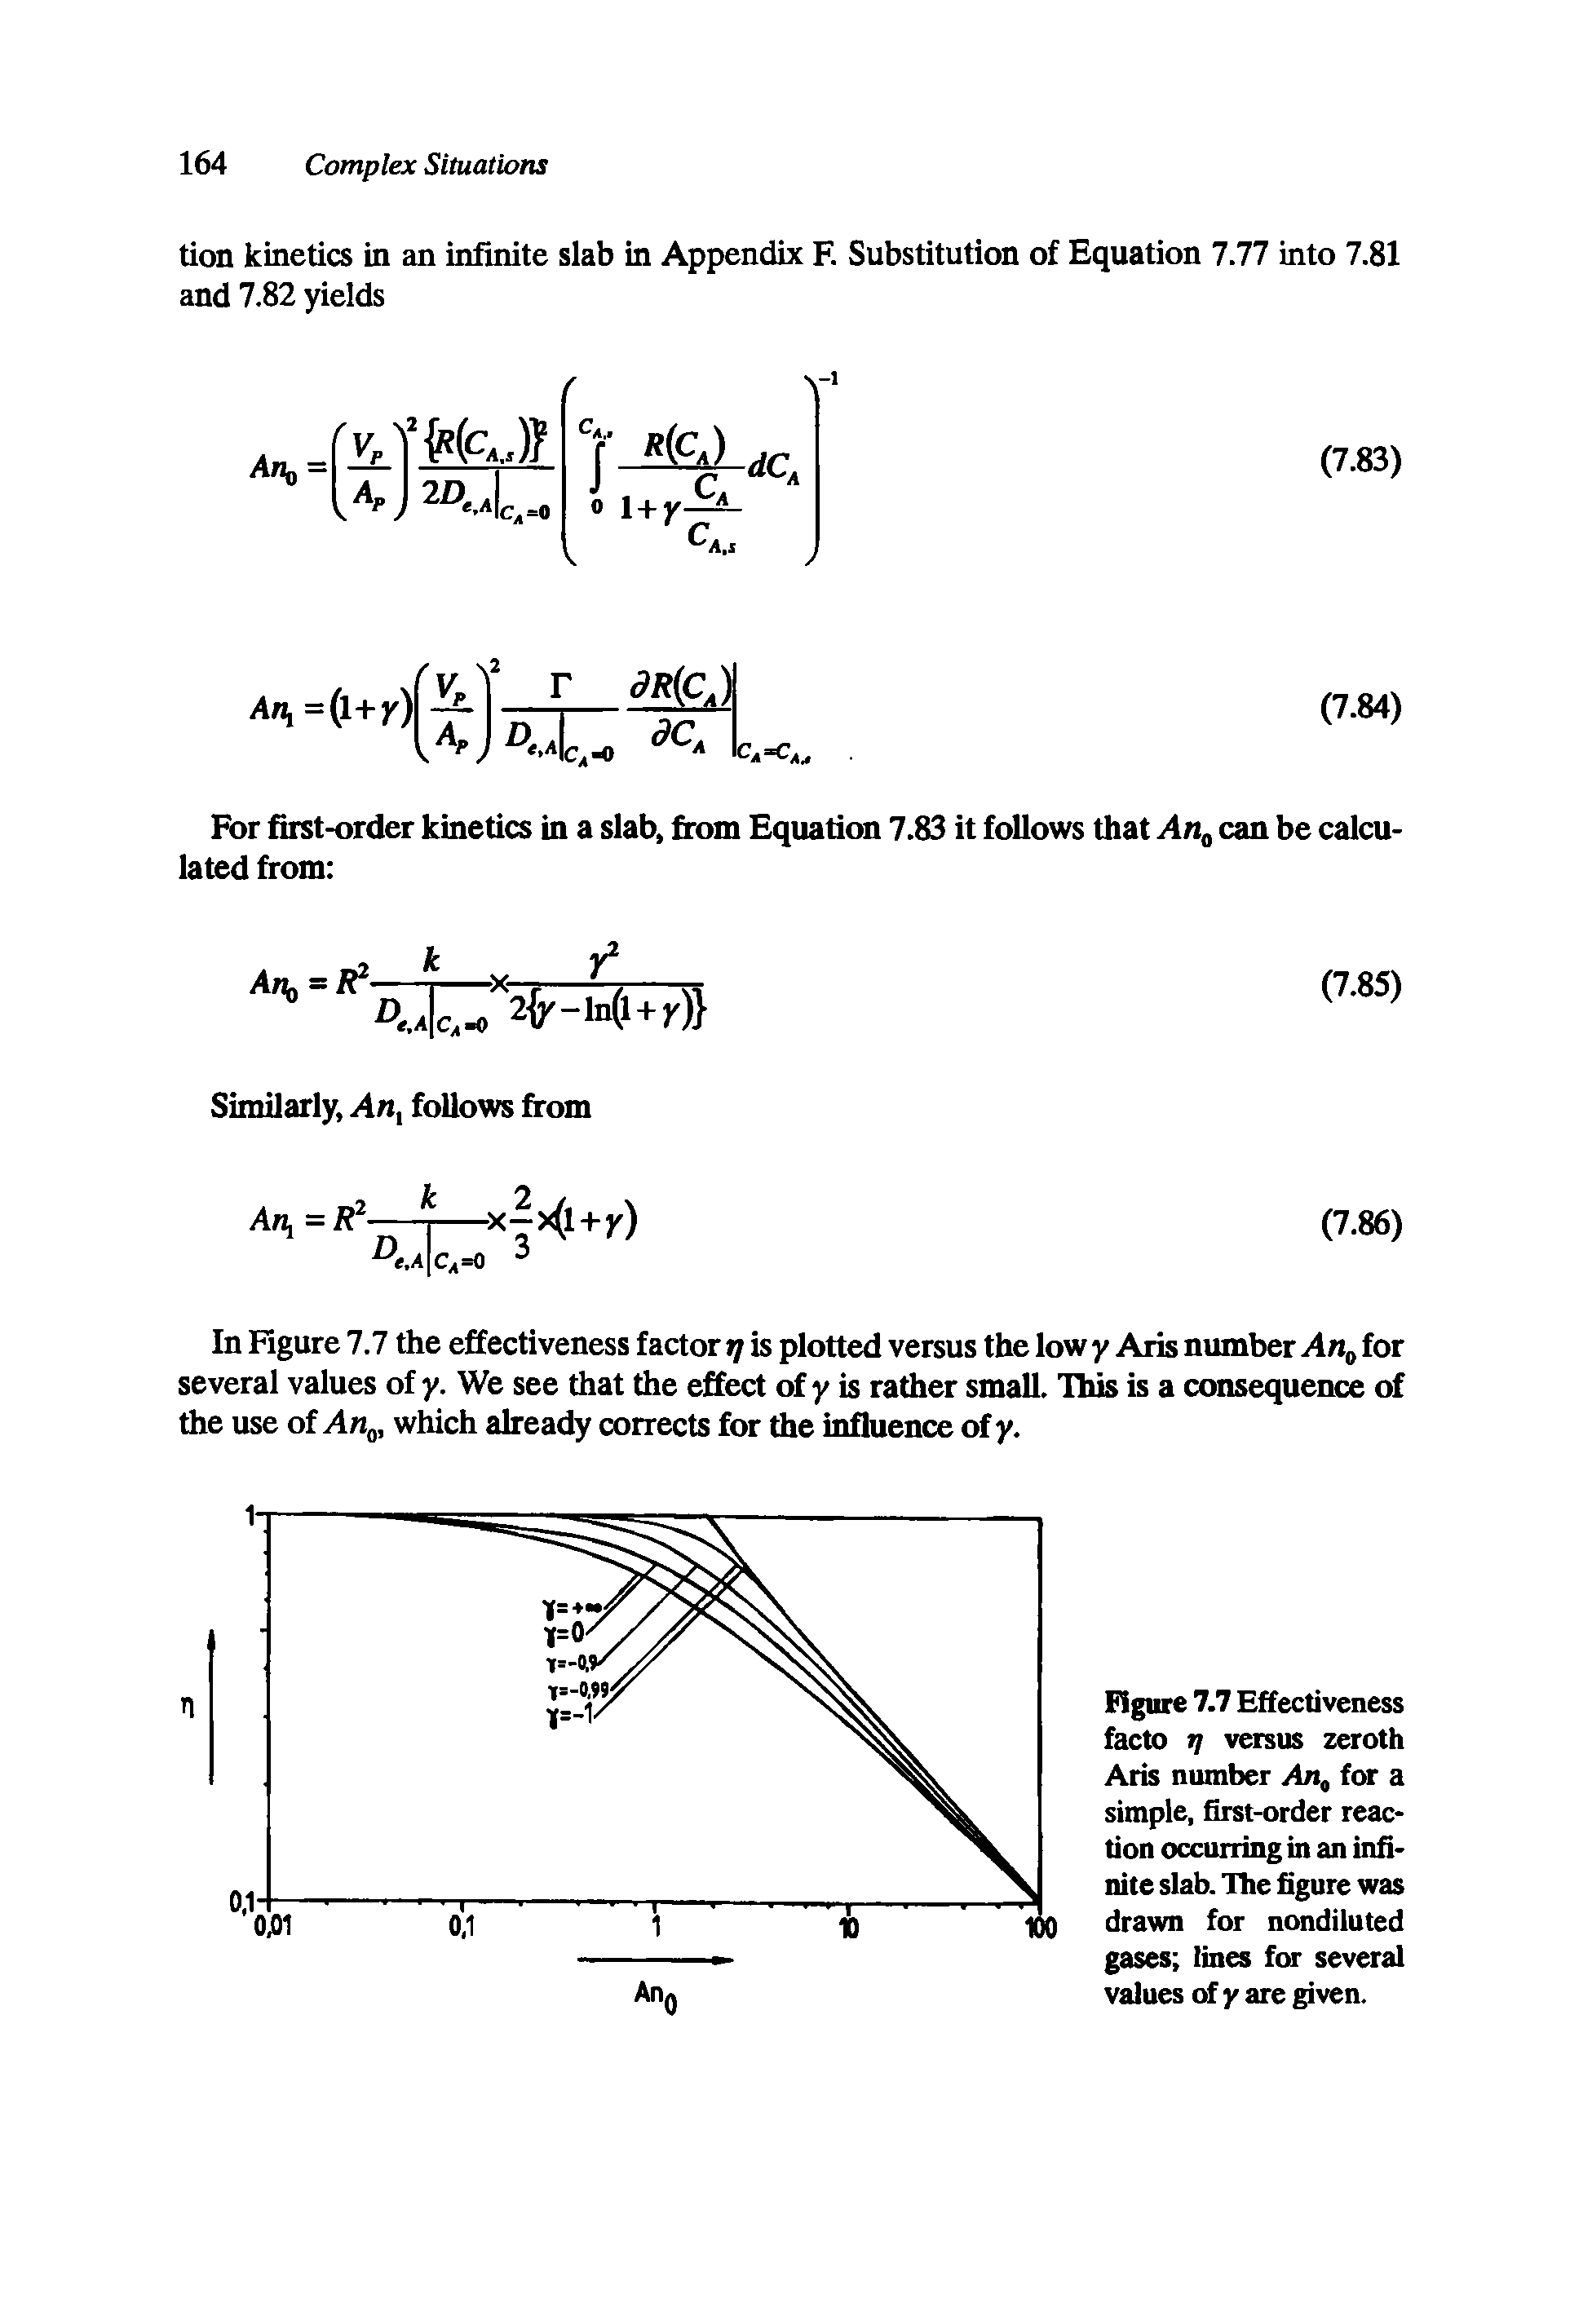 Figure 7.7 Effectiveness facto j/ versus zeroth Aris number An for a simple, first-order reaction occurring in an infinite slab. The figure was drawn for nondiluted gases lines for several values of y are given.